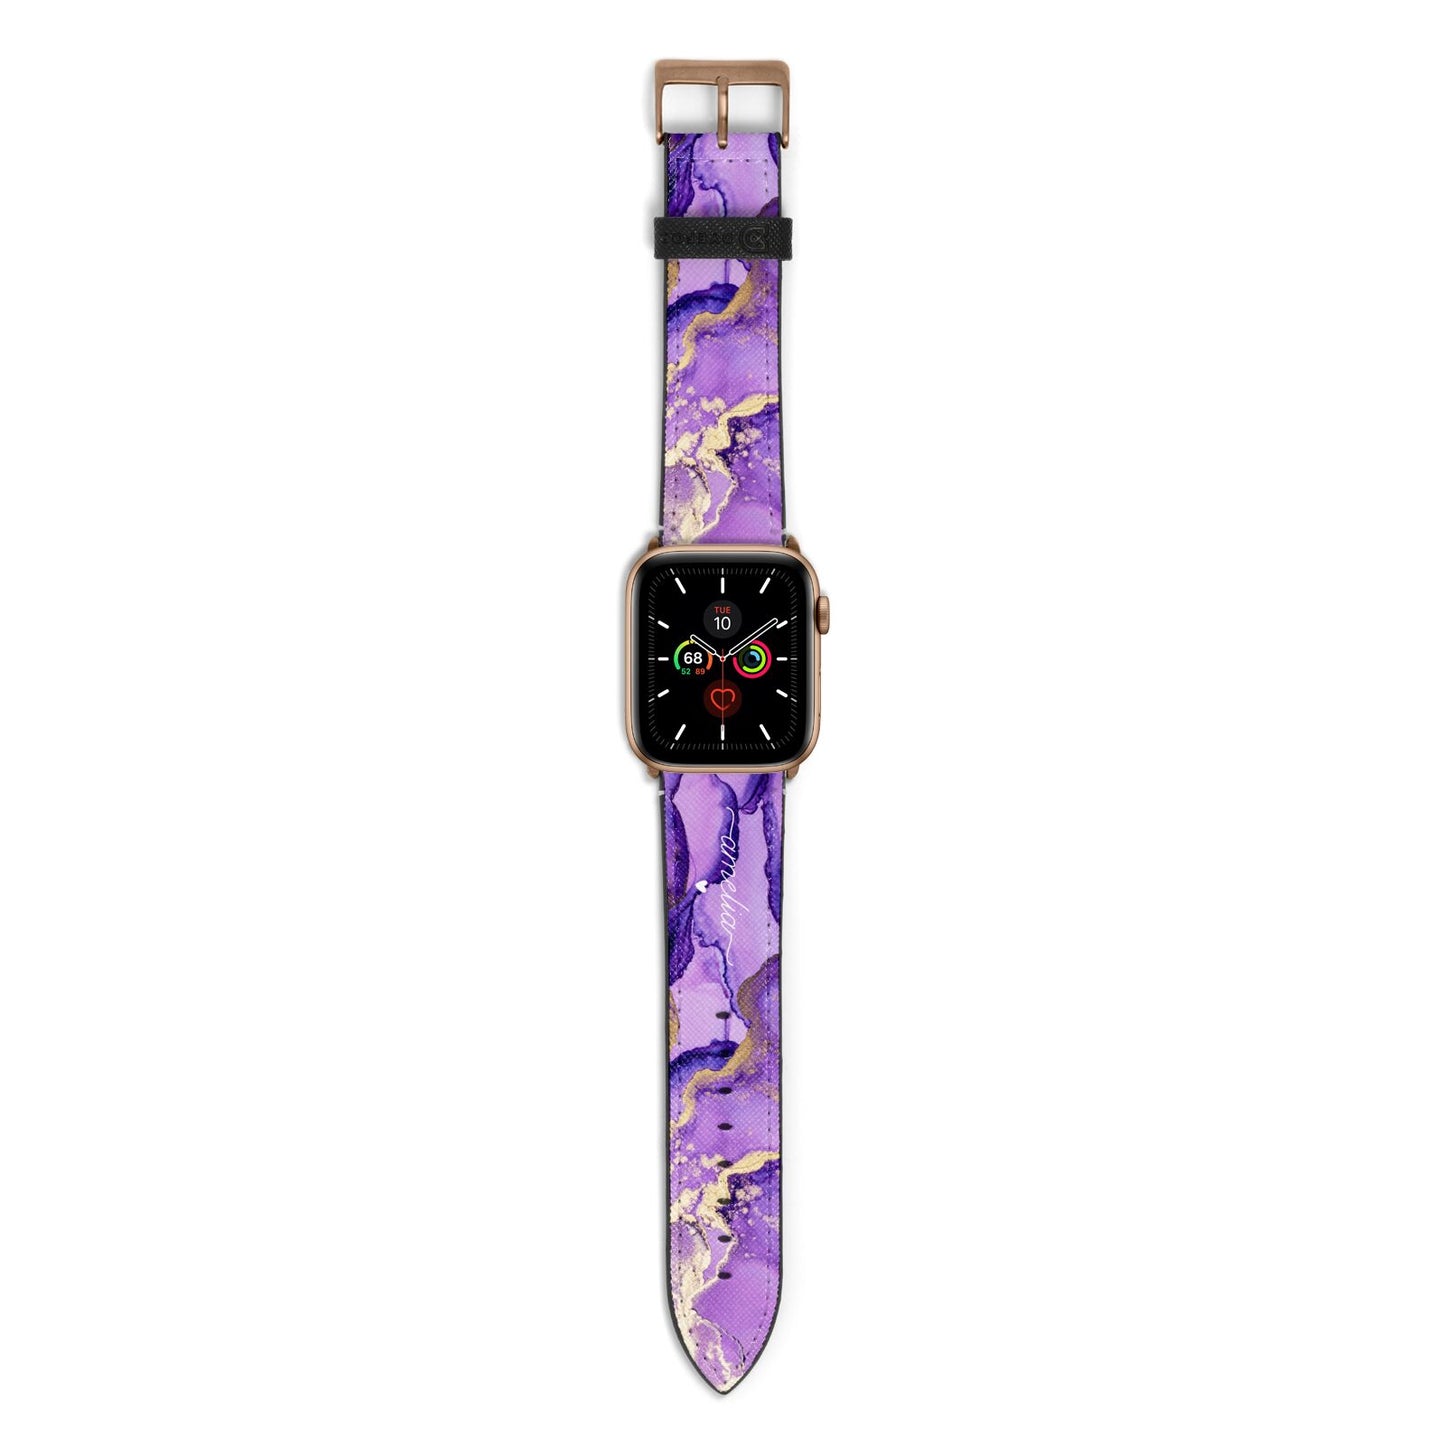 Purple Marble Apple Watch Strap with Gold Hardware